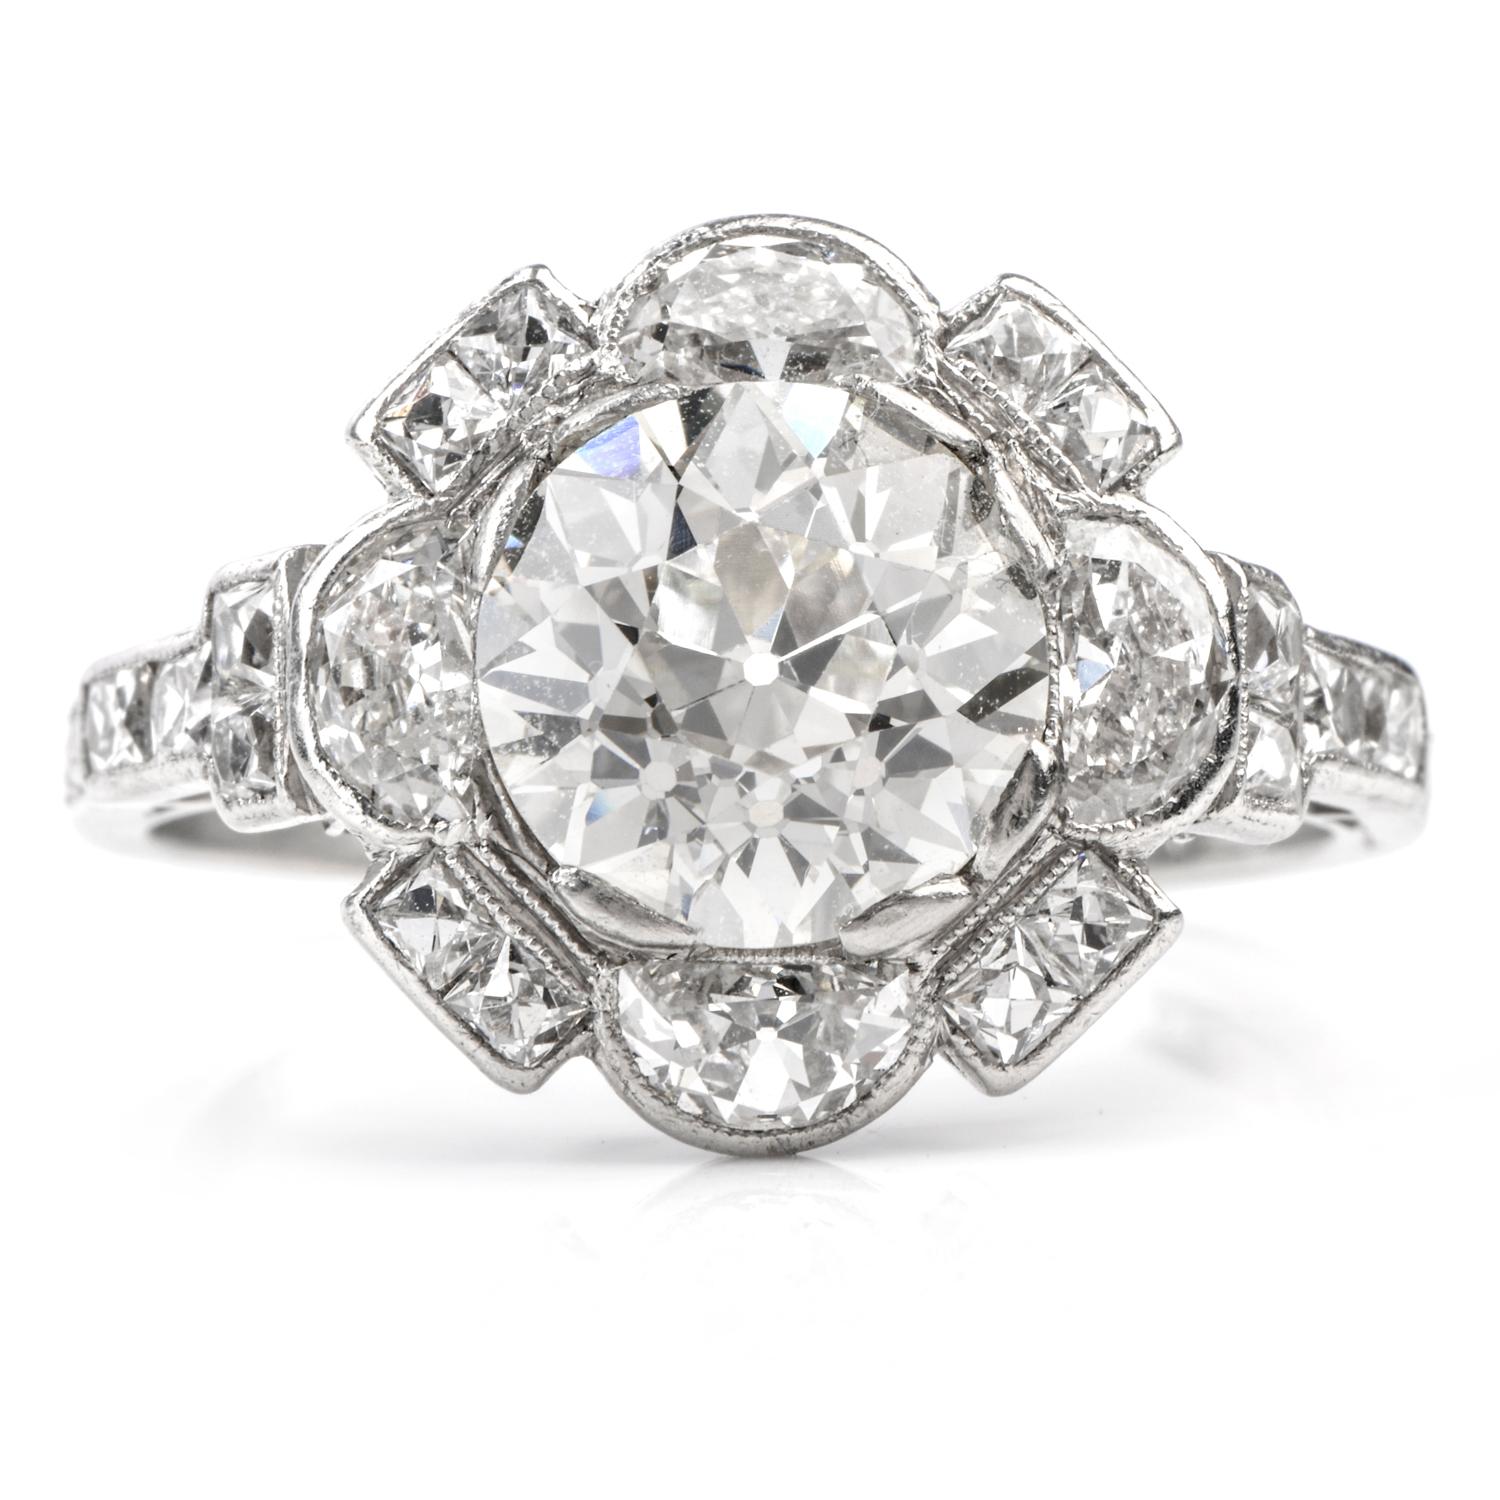 This Antique bright and vivid Diamond Engagement Cocktail Ring was inspired in a 

floral motif and crafted in Luxurious Platinum.

Featuring a round Old European Cut Diamond in the center weighing appx. 2.26 carats, 

this diamond is of I color and